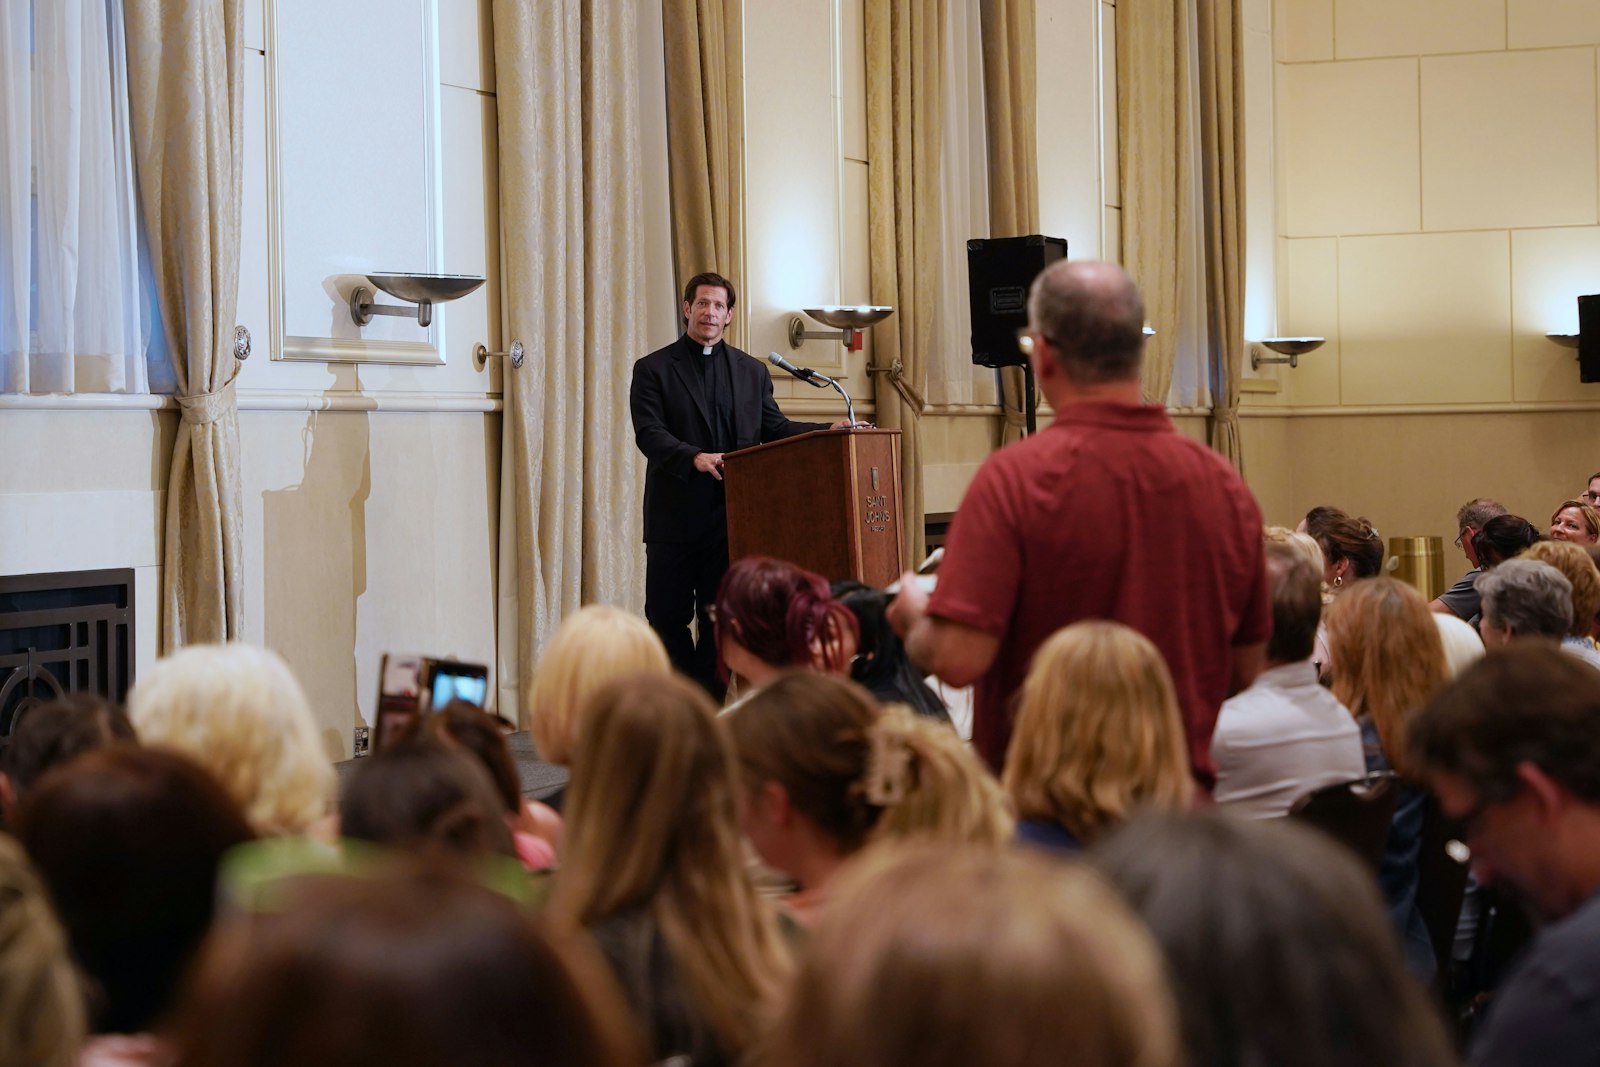 Fr. Schmitz takes a question from an audience member after his talk. The famed podcaster told audience members, to some surprise, that despite his numerous speaking engagements, he's an introvert who enjoys quiet time to himself.